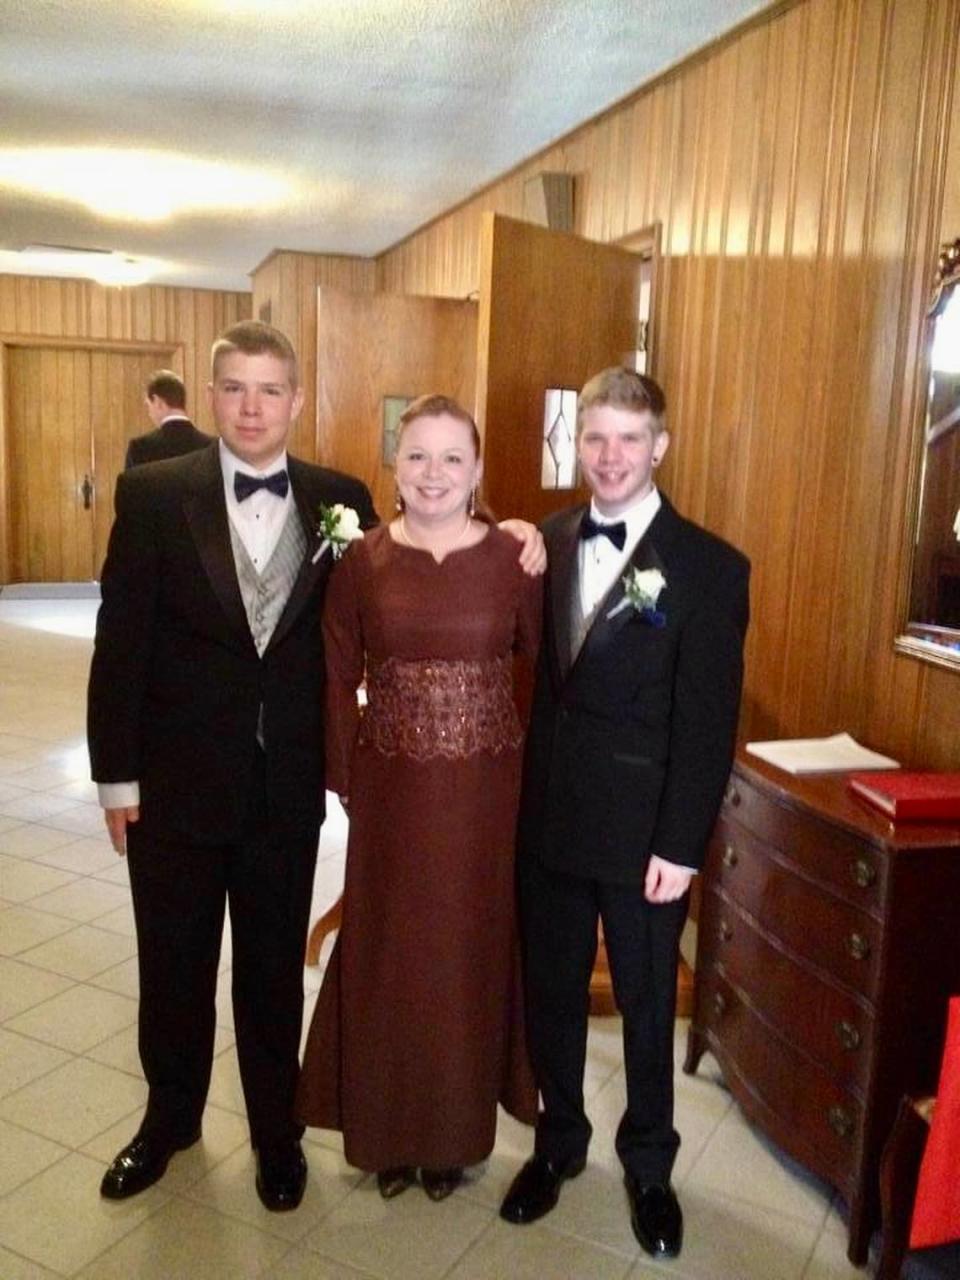 William Wonacott, left, pictured with his mother, Brandi, and brother, James. The Yakima brothers both died from fentanyl overdoses within a year of each other.